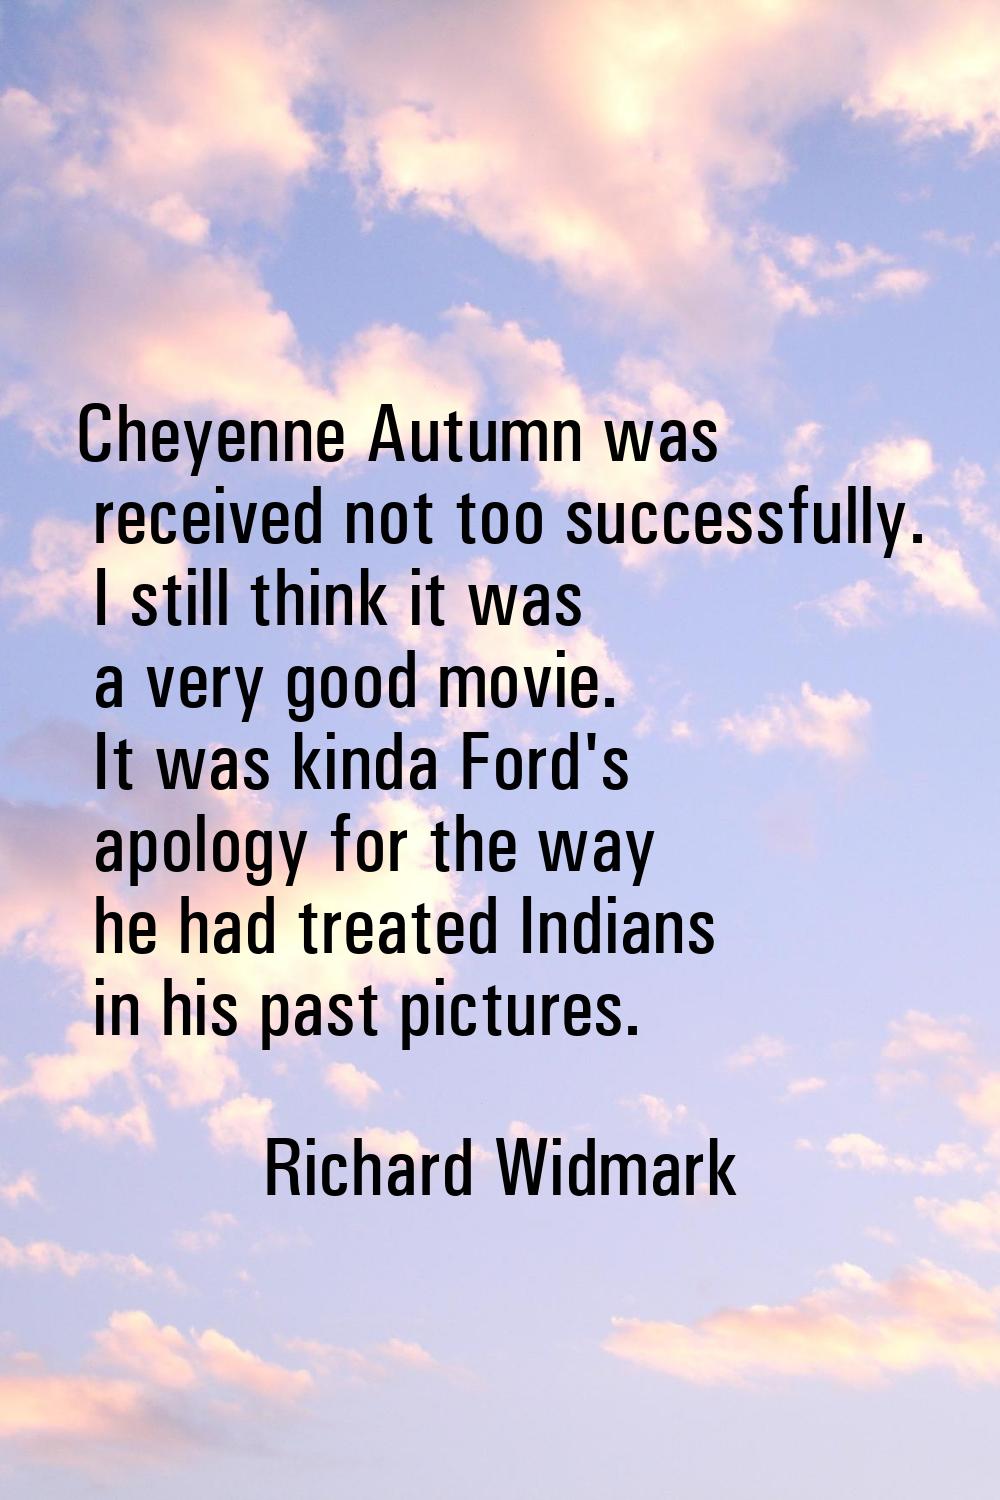 Cheyenne Autumn was received not too successfully. I still think it was a very good movie. It was k